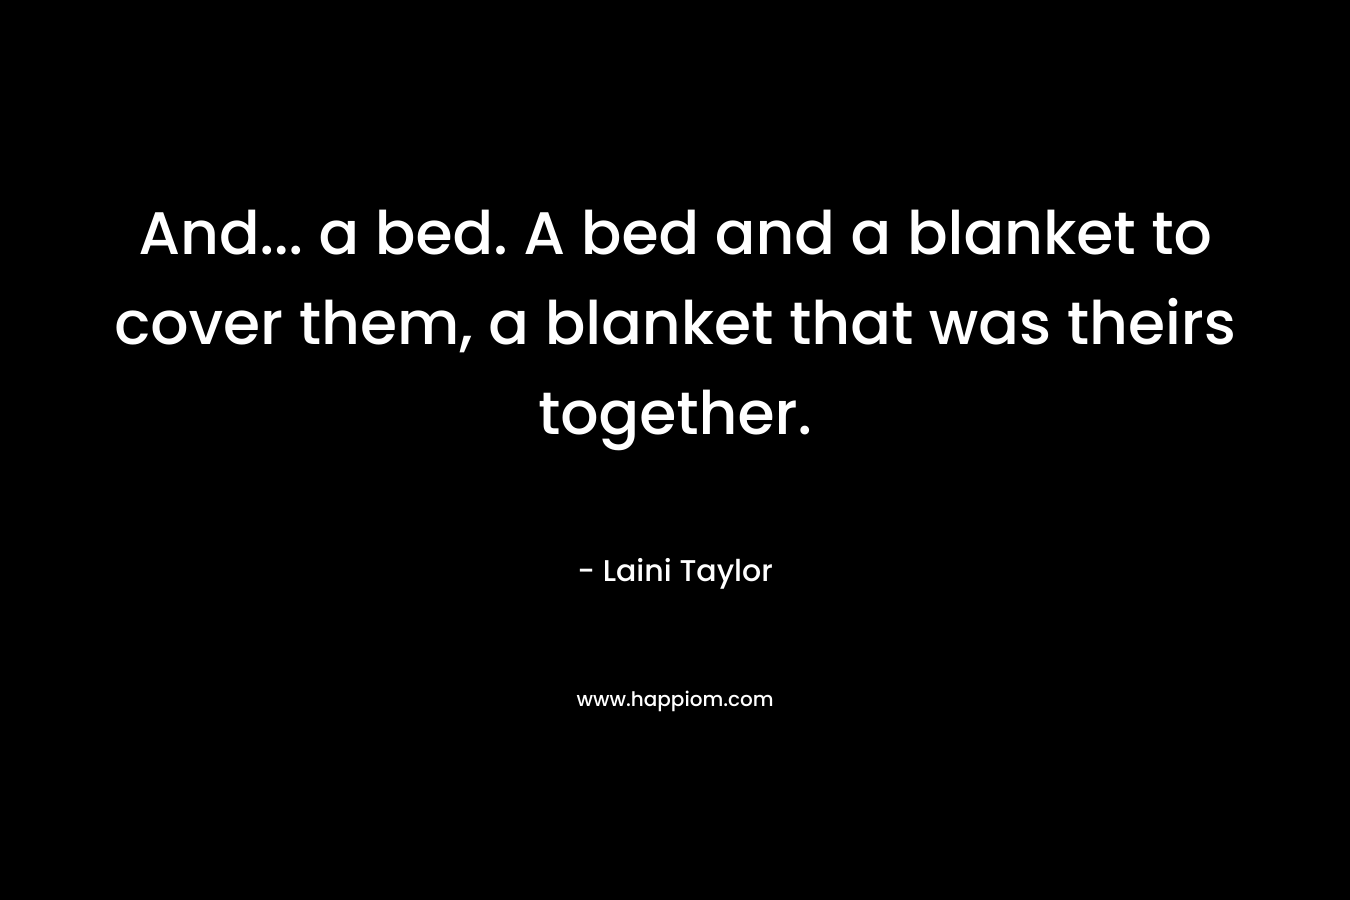 And… a bed. A bed and a blanket to cover them, a blanket that was theirs together. – Laini Taylor